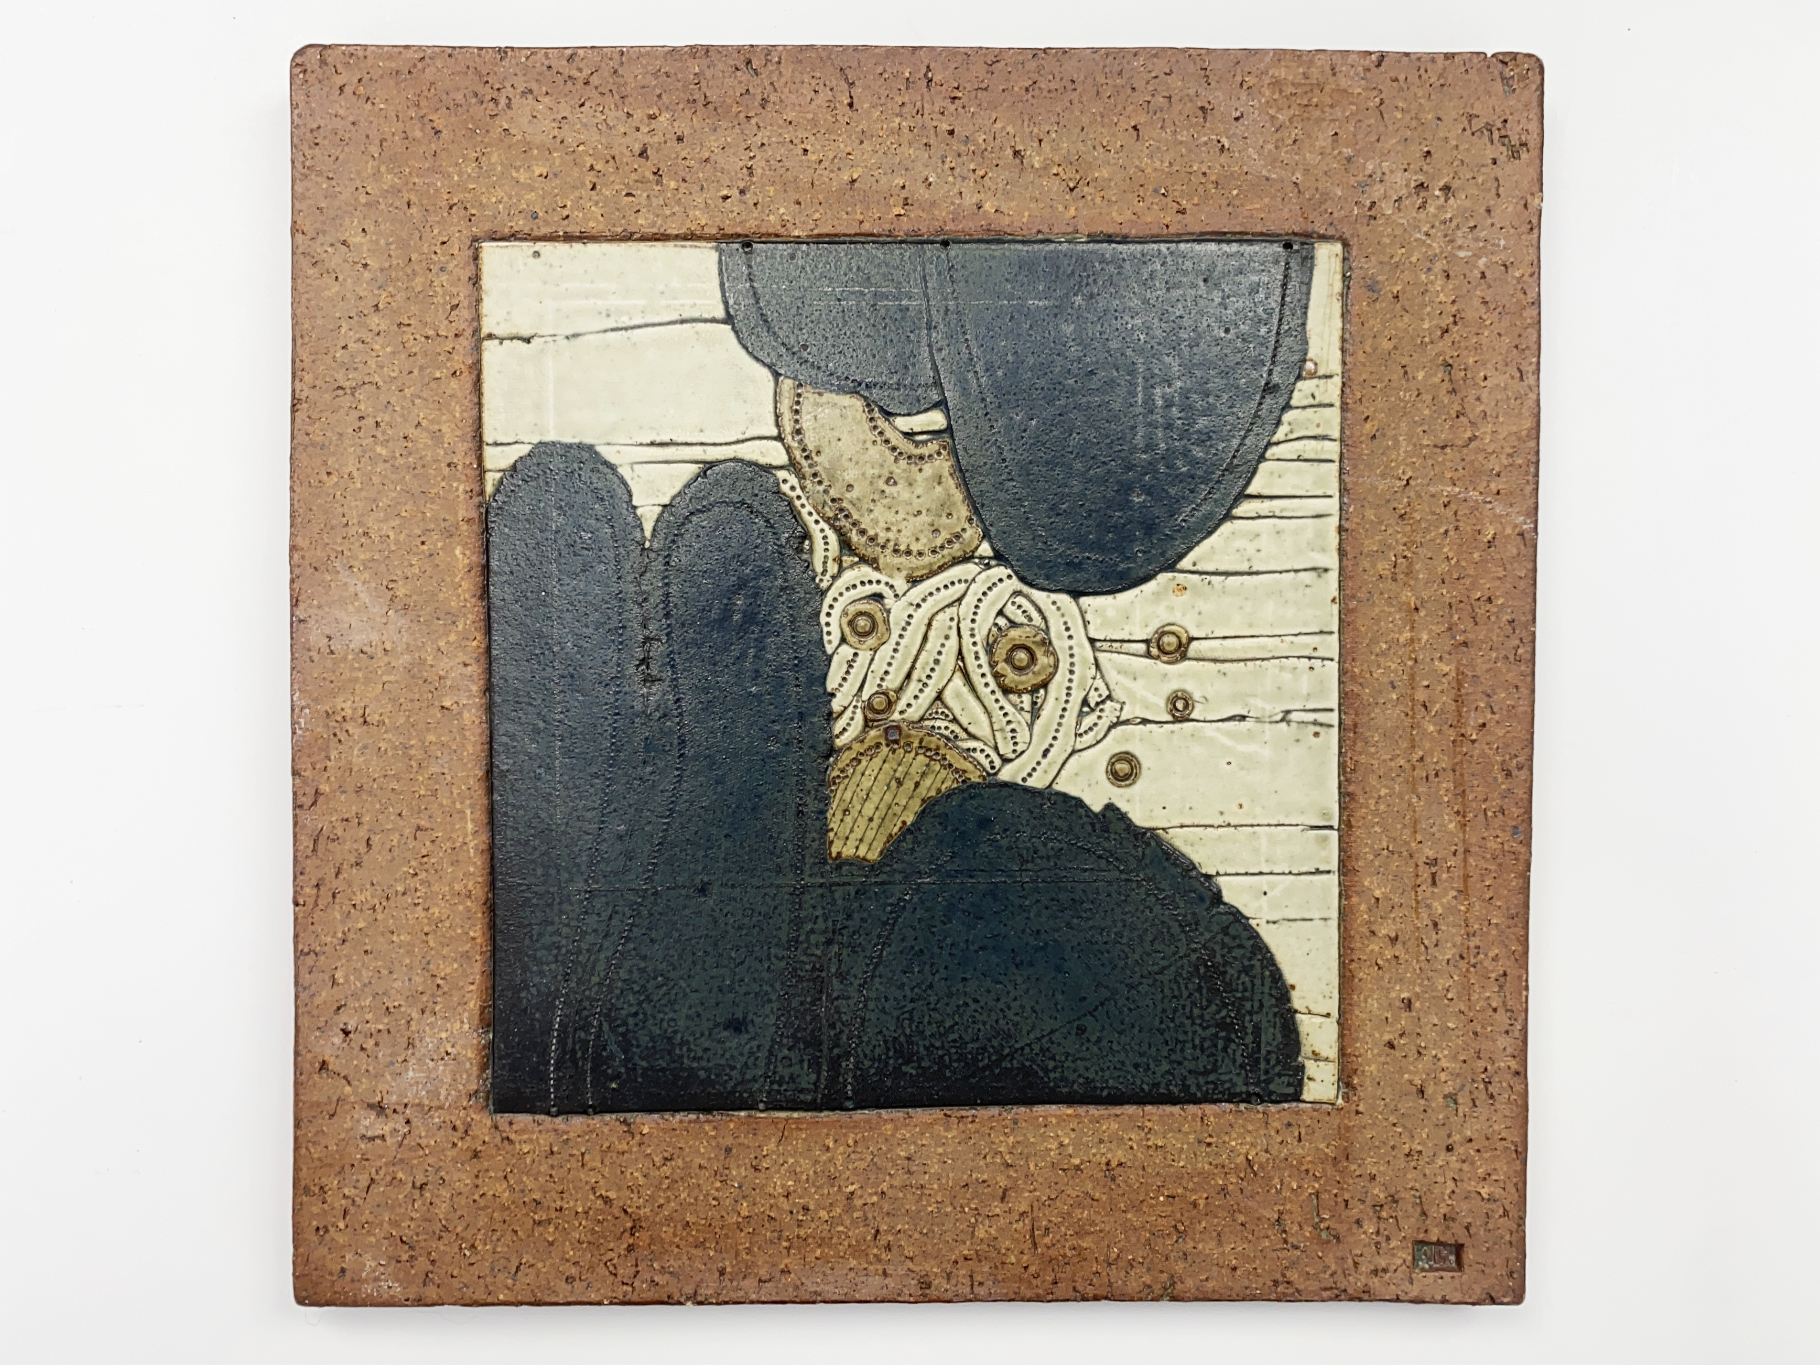 Wall Plate, Ceramic, Stoneware, Unique Piece, abstract Motif, Overmolding of different colored Clays, by Wilhelm & Elly Kuch, ca 1985